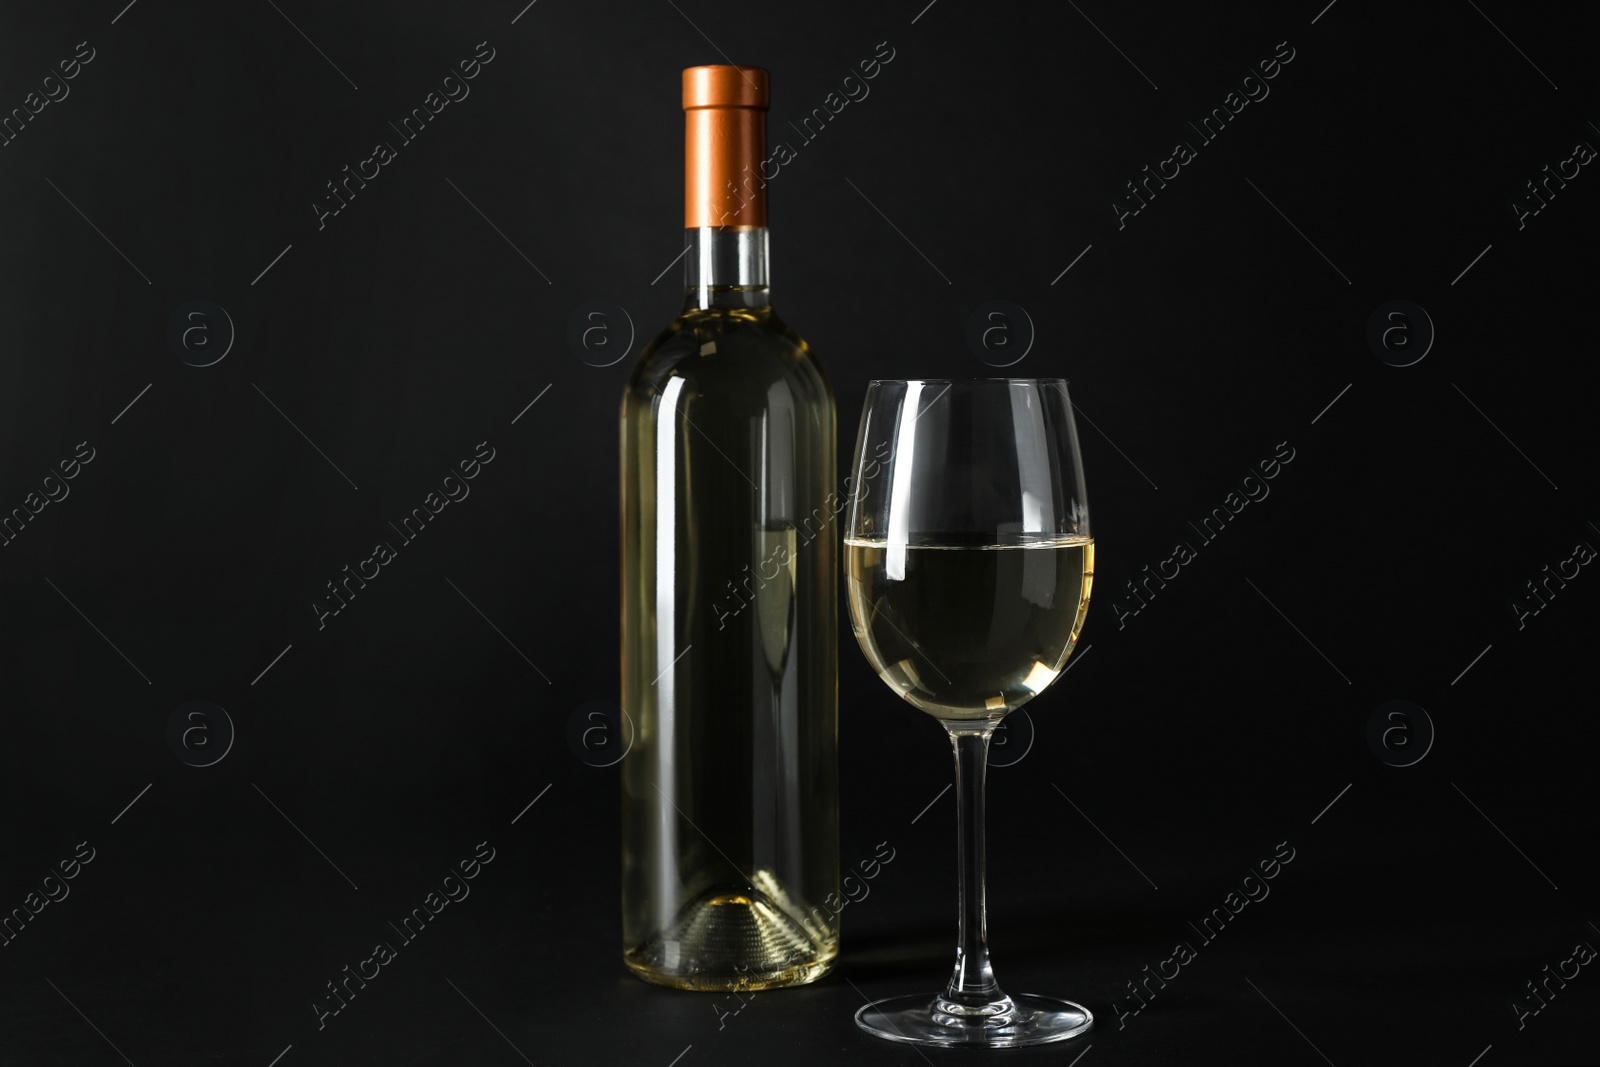 Photo of Bottle and glass of expensive white wine on dark background